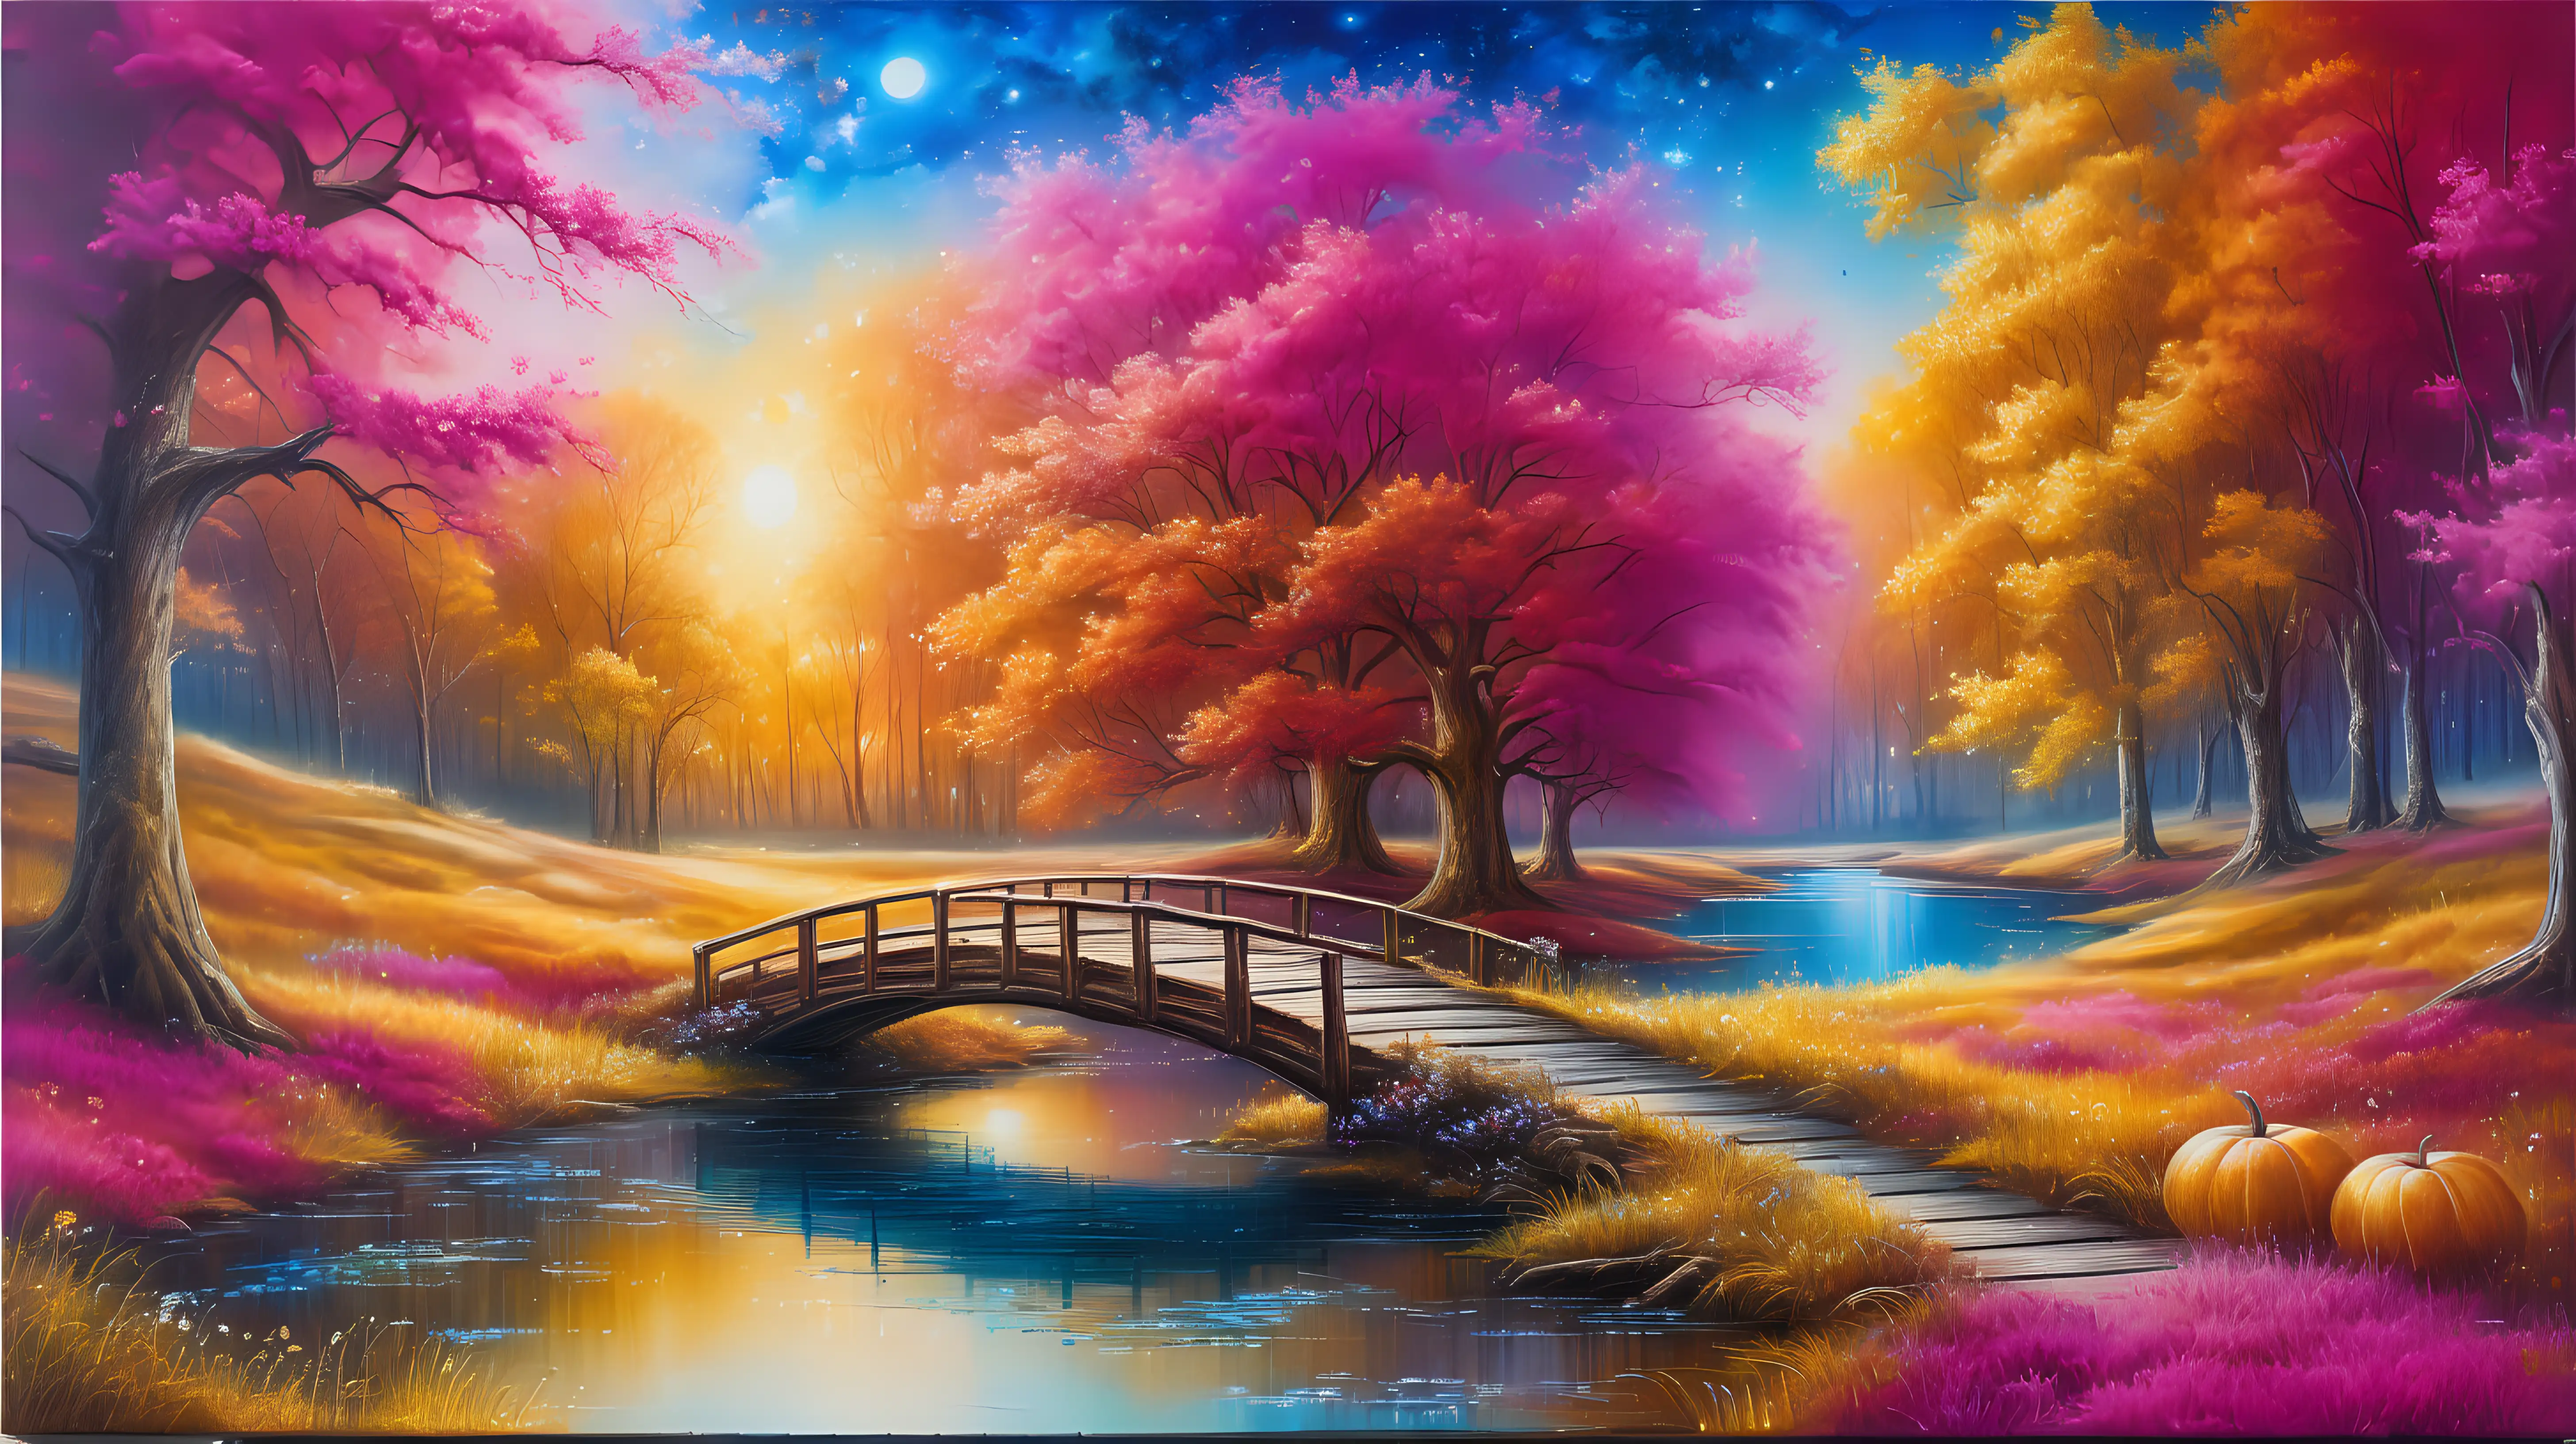 Textured Oil paining of Autumn covered forest with green and Blue and red. Pink and Red luminescent water and golden luminescent grass in the daytime autumn oak trees and magical flowers with a magical golden glowing forest with a pond in the meadow. With a wooden bridge to another world and pumpkins. Massive, Blue-gold-magenta planet in the sky.